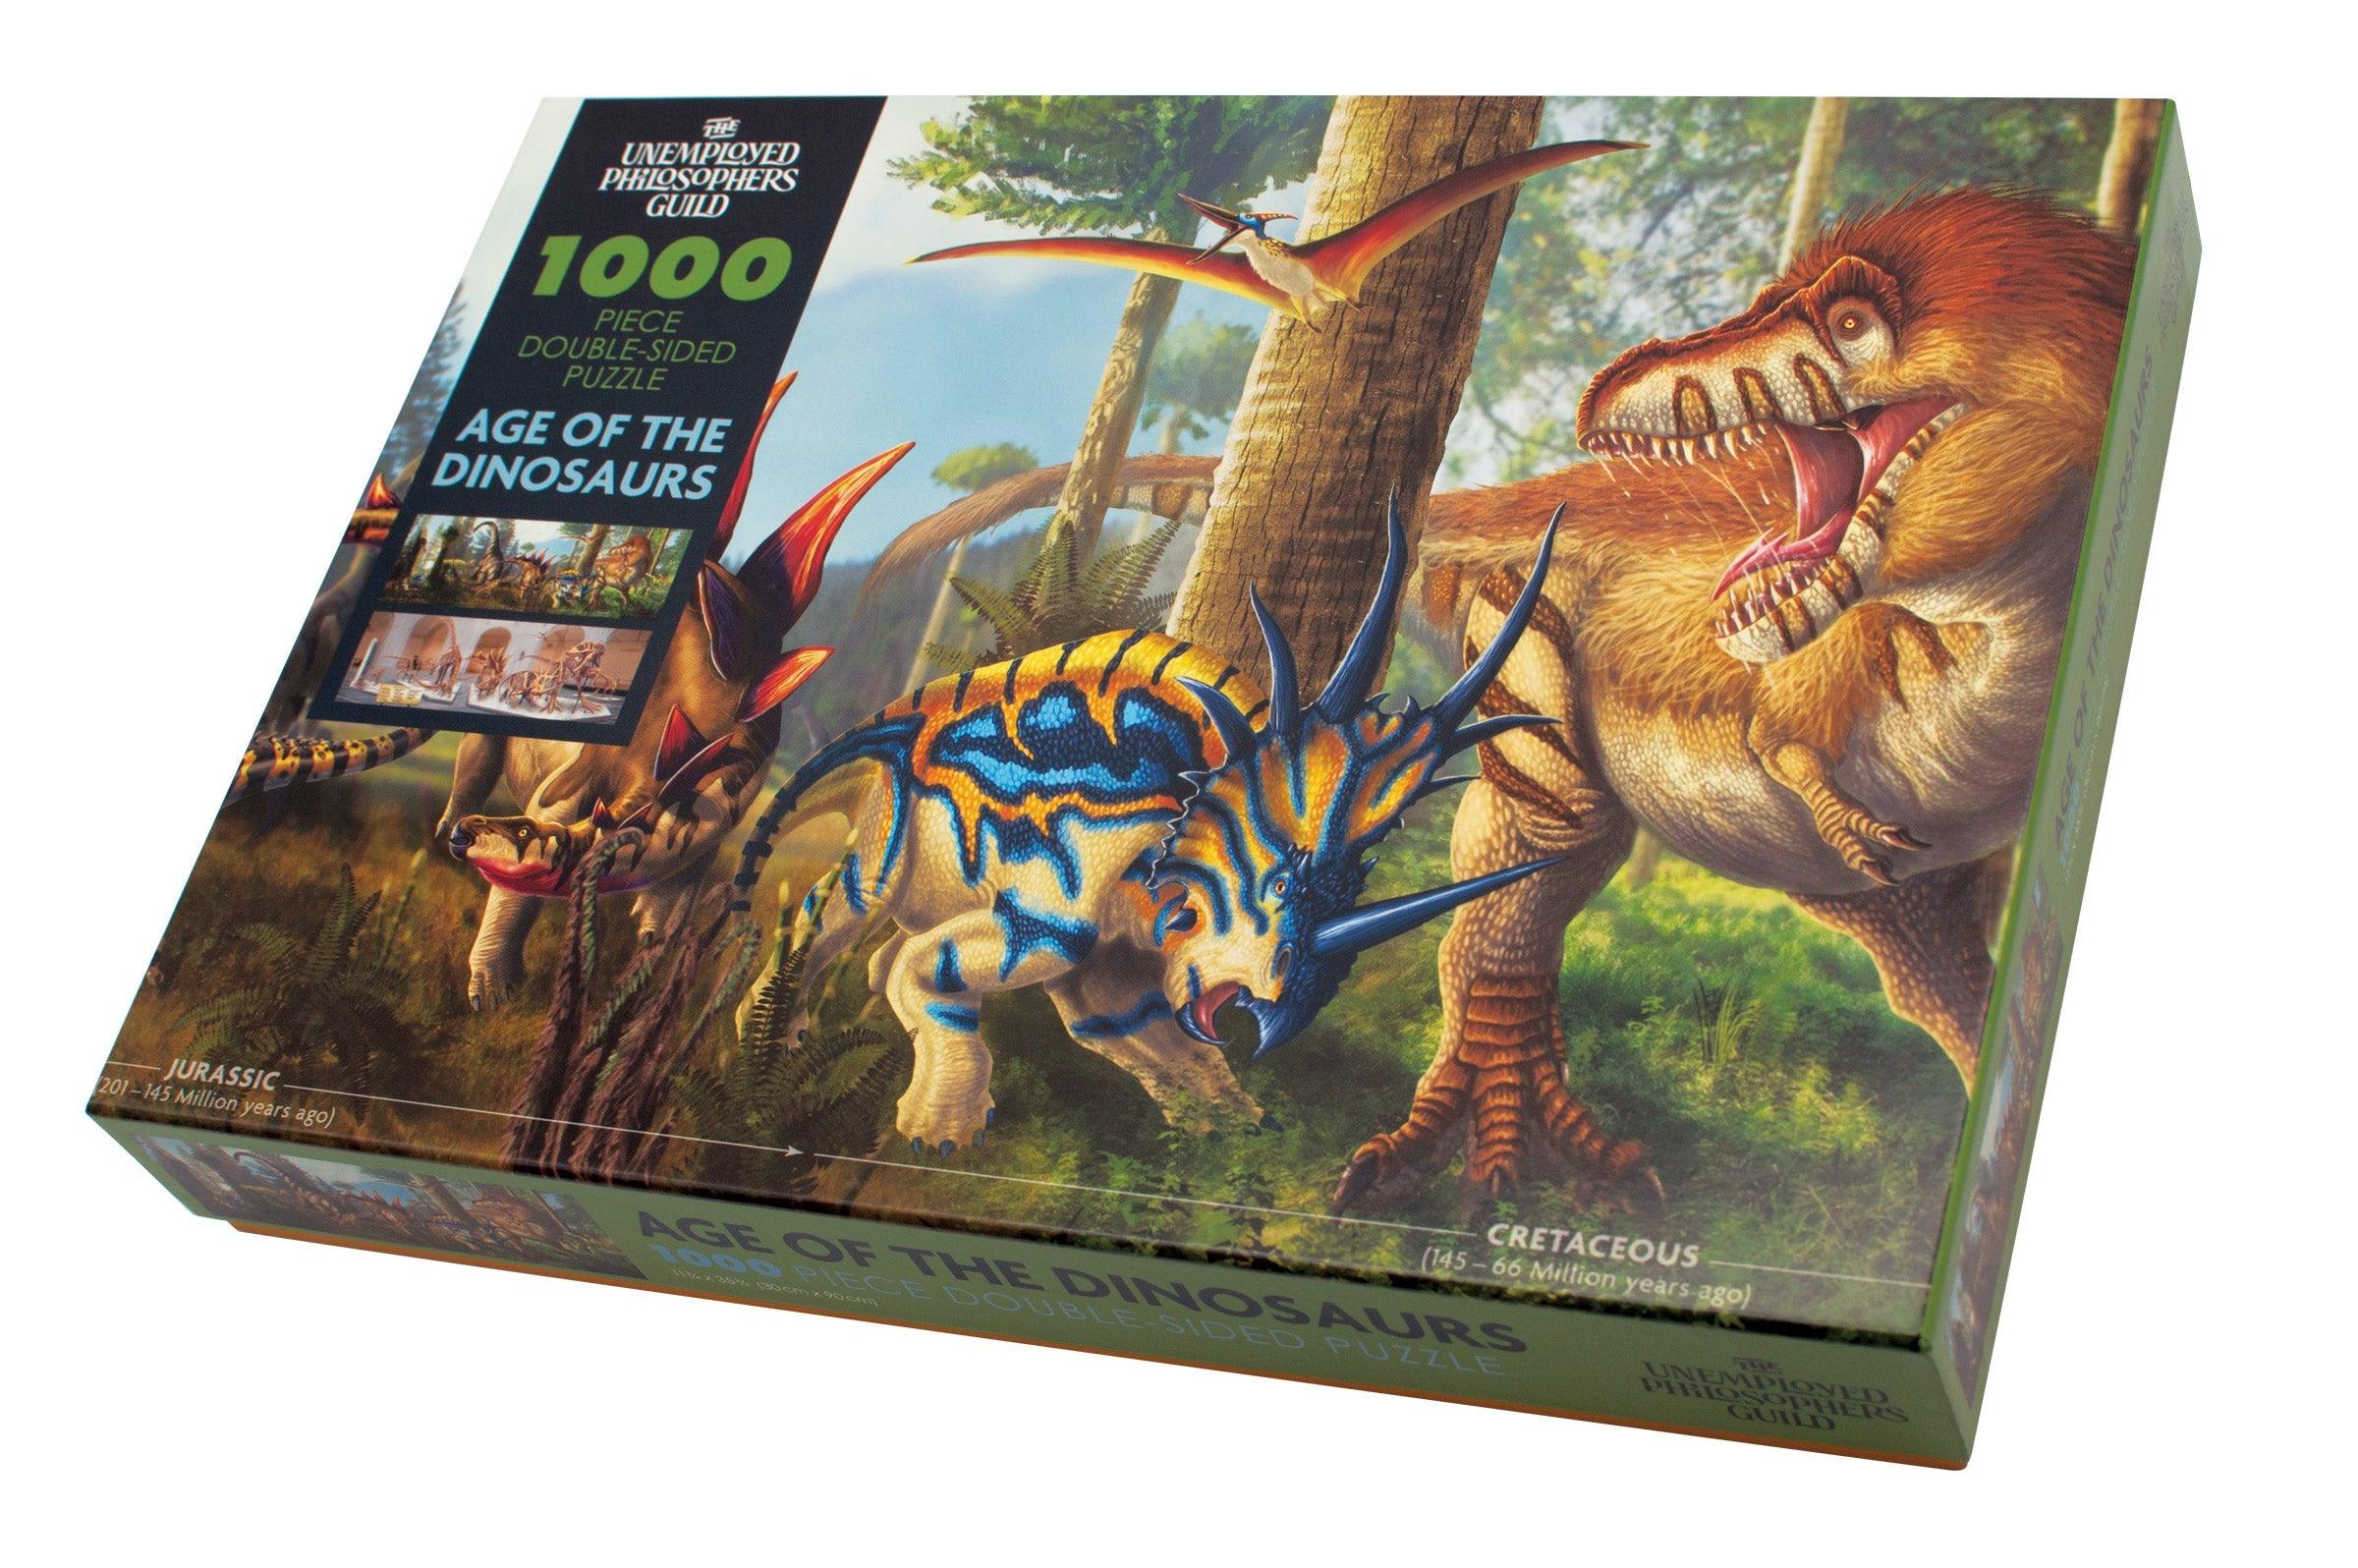 Product photo of Age of the Dinosaurs Jigsaw Puzzle, a novelty gift manufactured by The Unemployed Philosophers Guild.